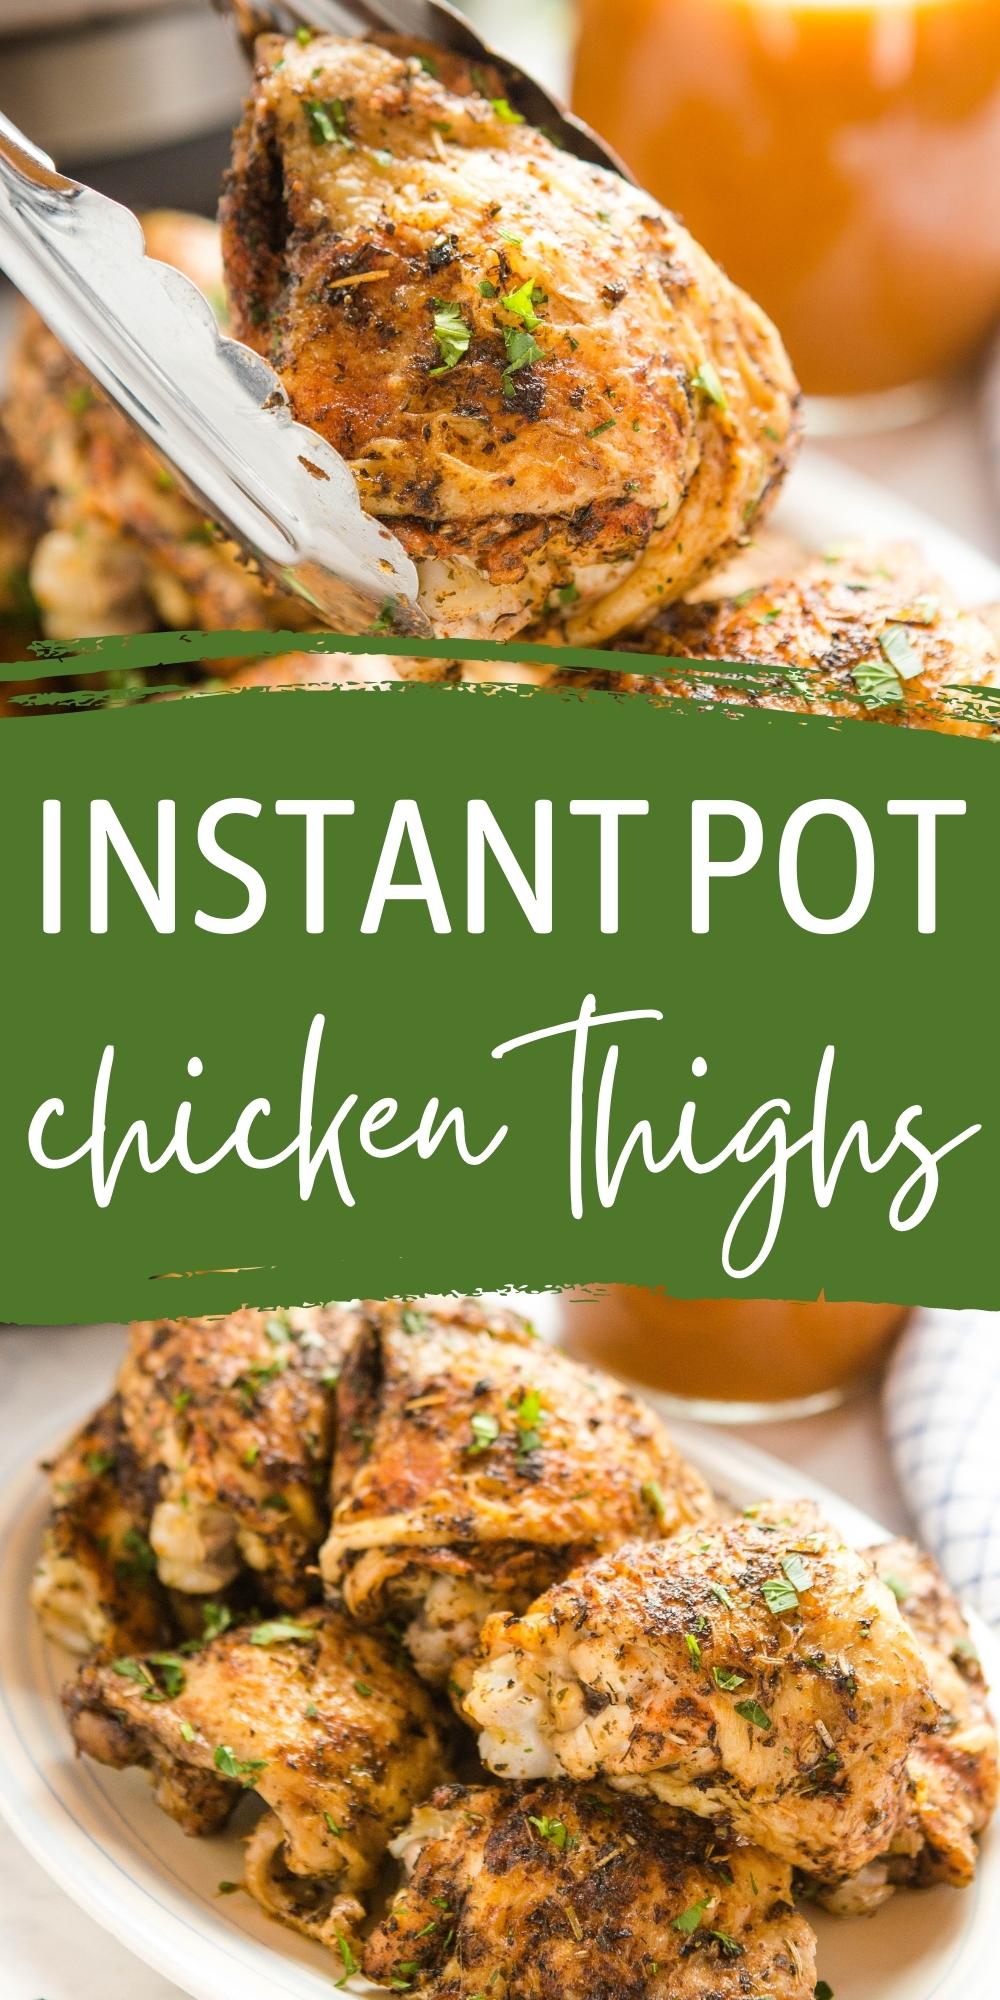 These Instant Pot Chicken Thighs are the perfect easy main dish that's on the table in under 30 minutes! Juicy roast chicken thighs with browned skin and velvety gravy  - no oven or stovetop required! Recipe from thebusybaker.ca! #instantpot #chickenthighs #instantpotchicken #easychickenrecipe #familymeal #chickenandgravy #instantpotgravy #easymeal via @busybakerblog